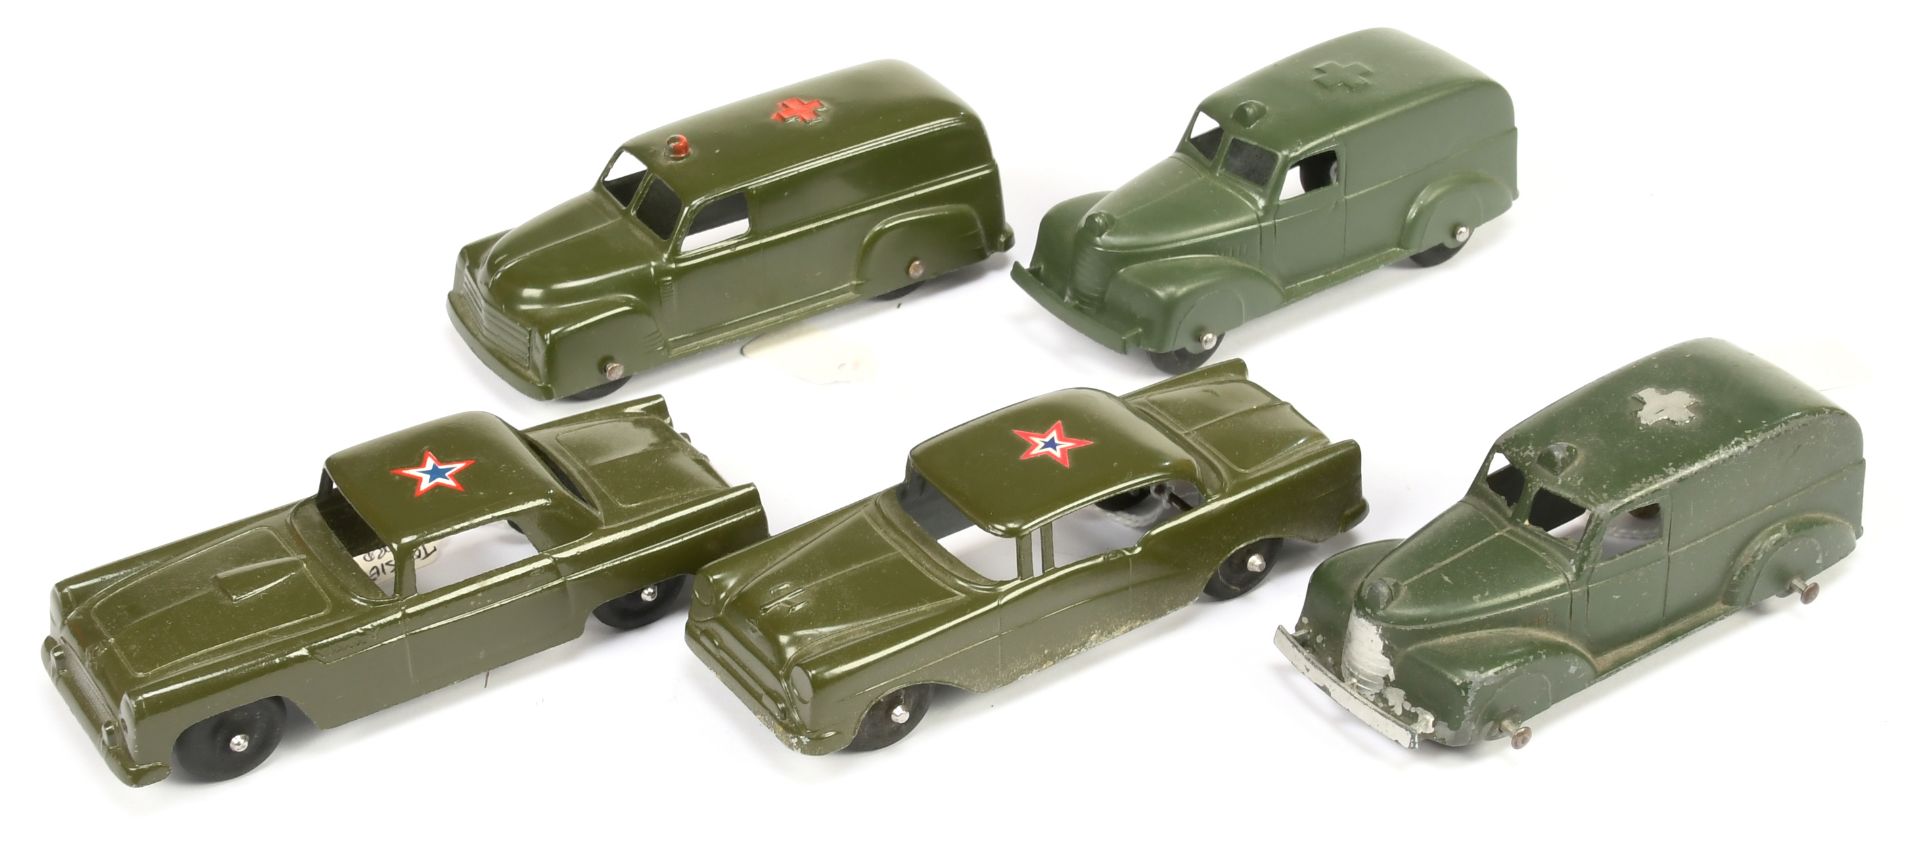 Tootsietoy military  group of 5  - "Ambulances" and "staff" cars to include 2 x "staff" cars